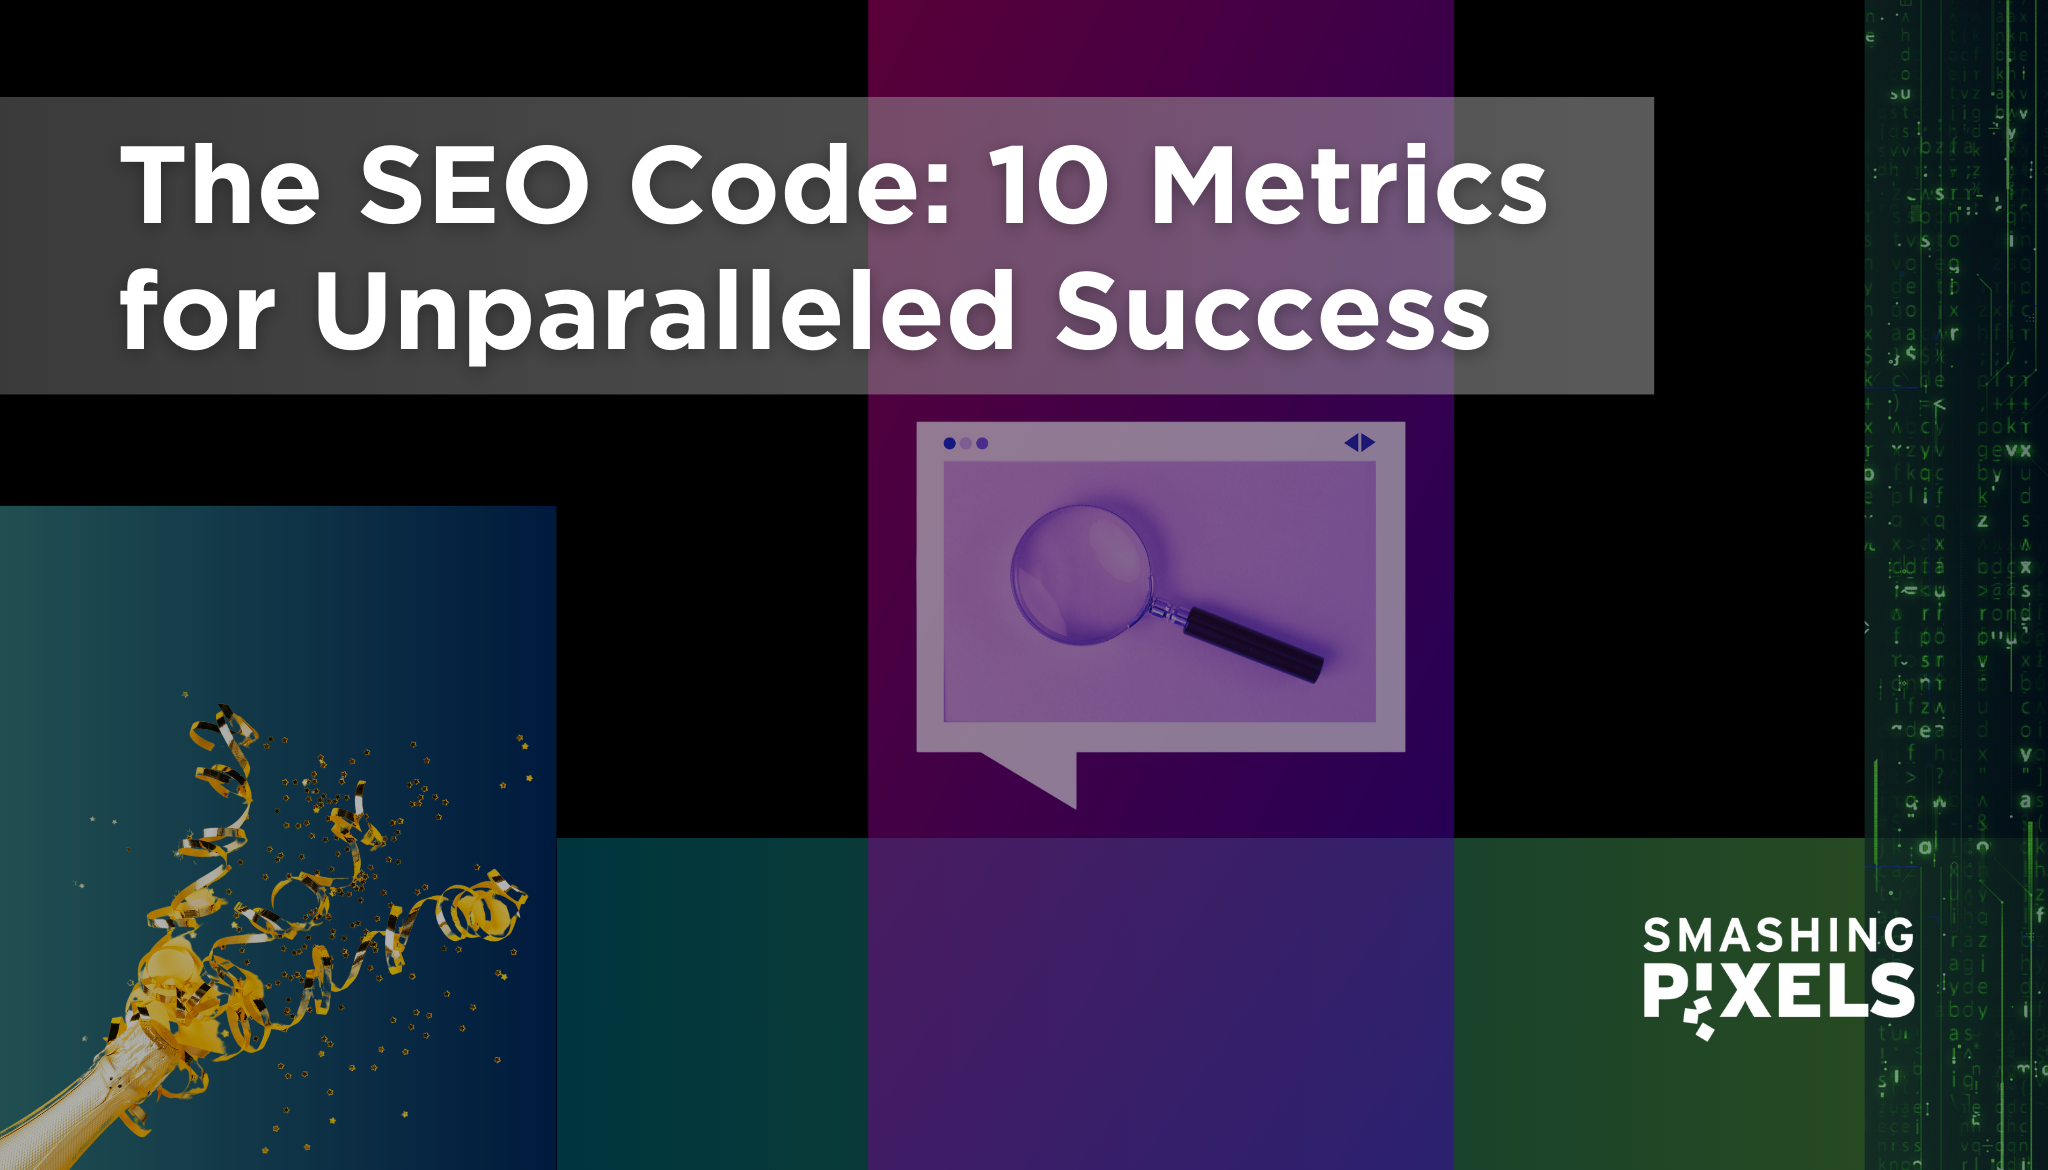 The SEO Code: 10 Metrics for Unparalleled Success